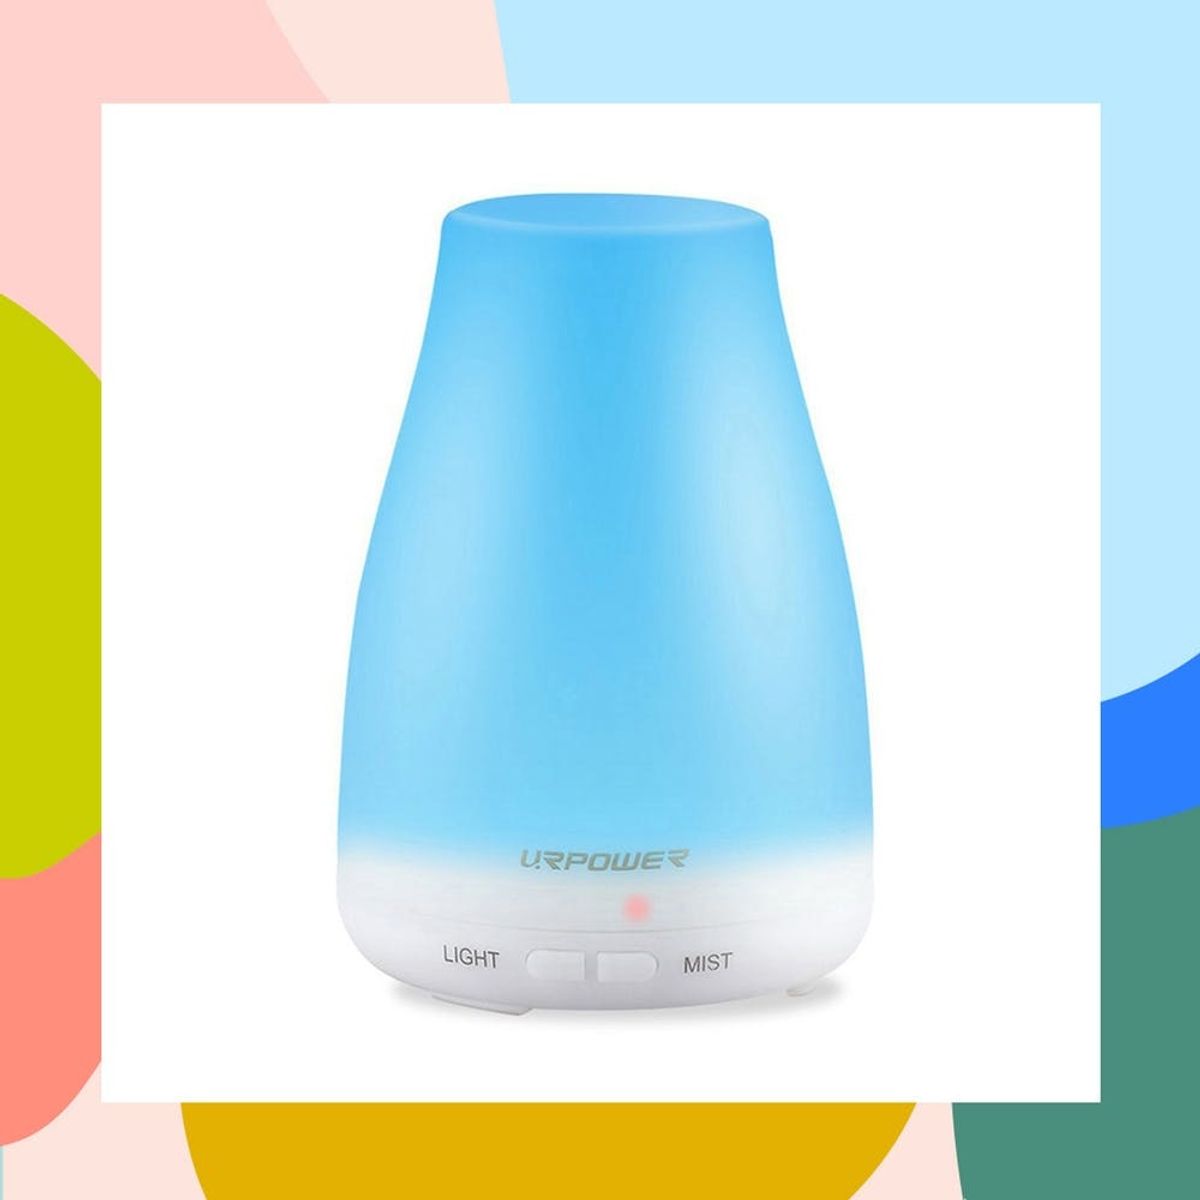 Over 27,000 Amazon Customers Are Obsessed With This Essential Oil Diffuser — Here’s Why